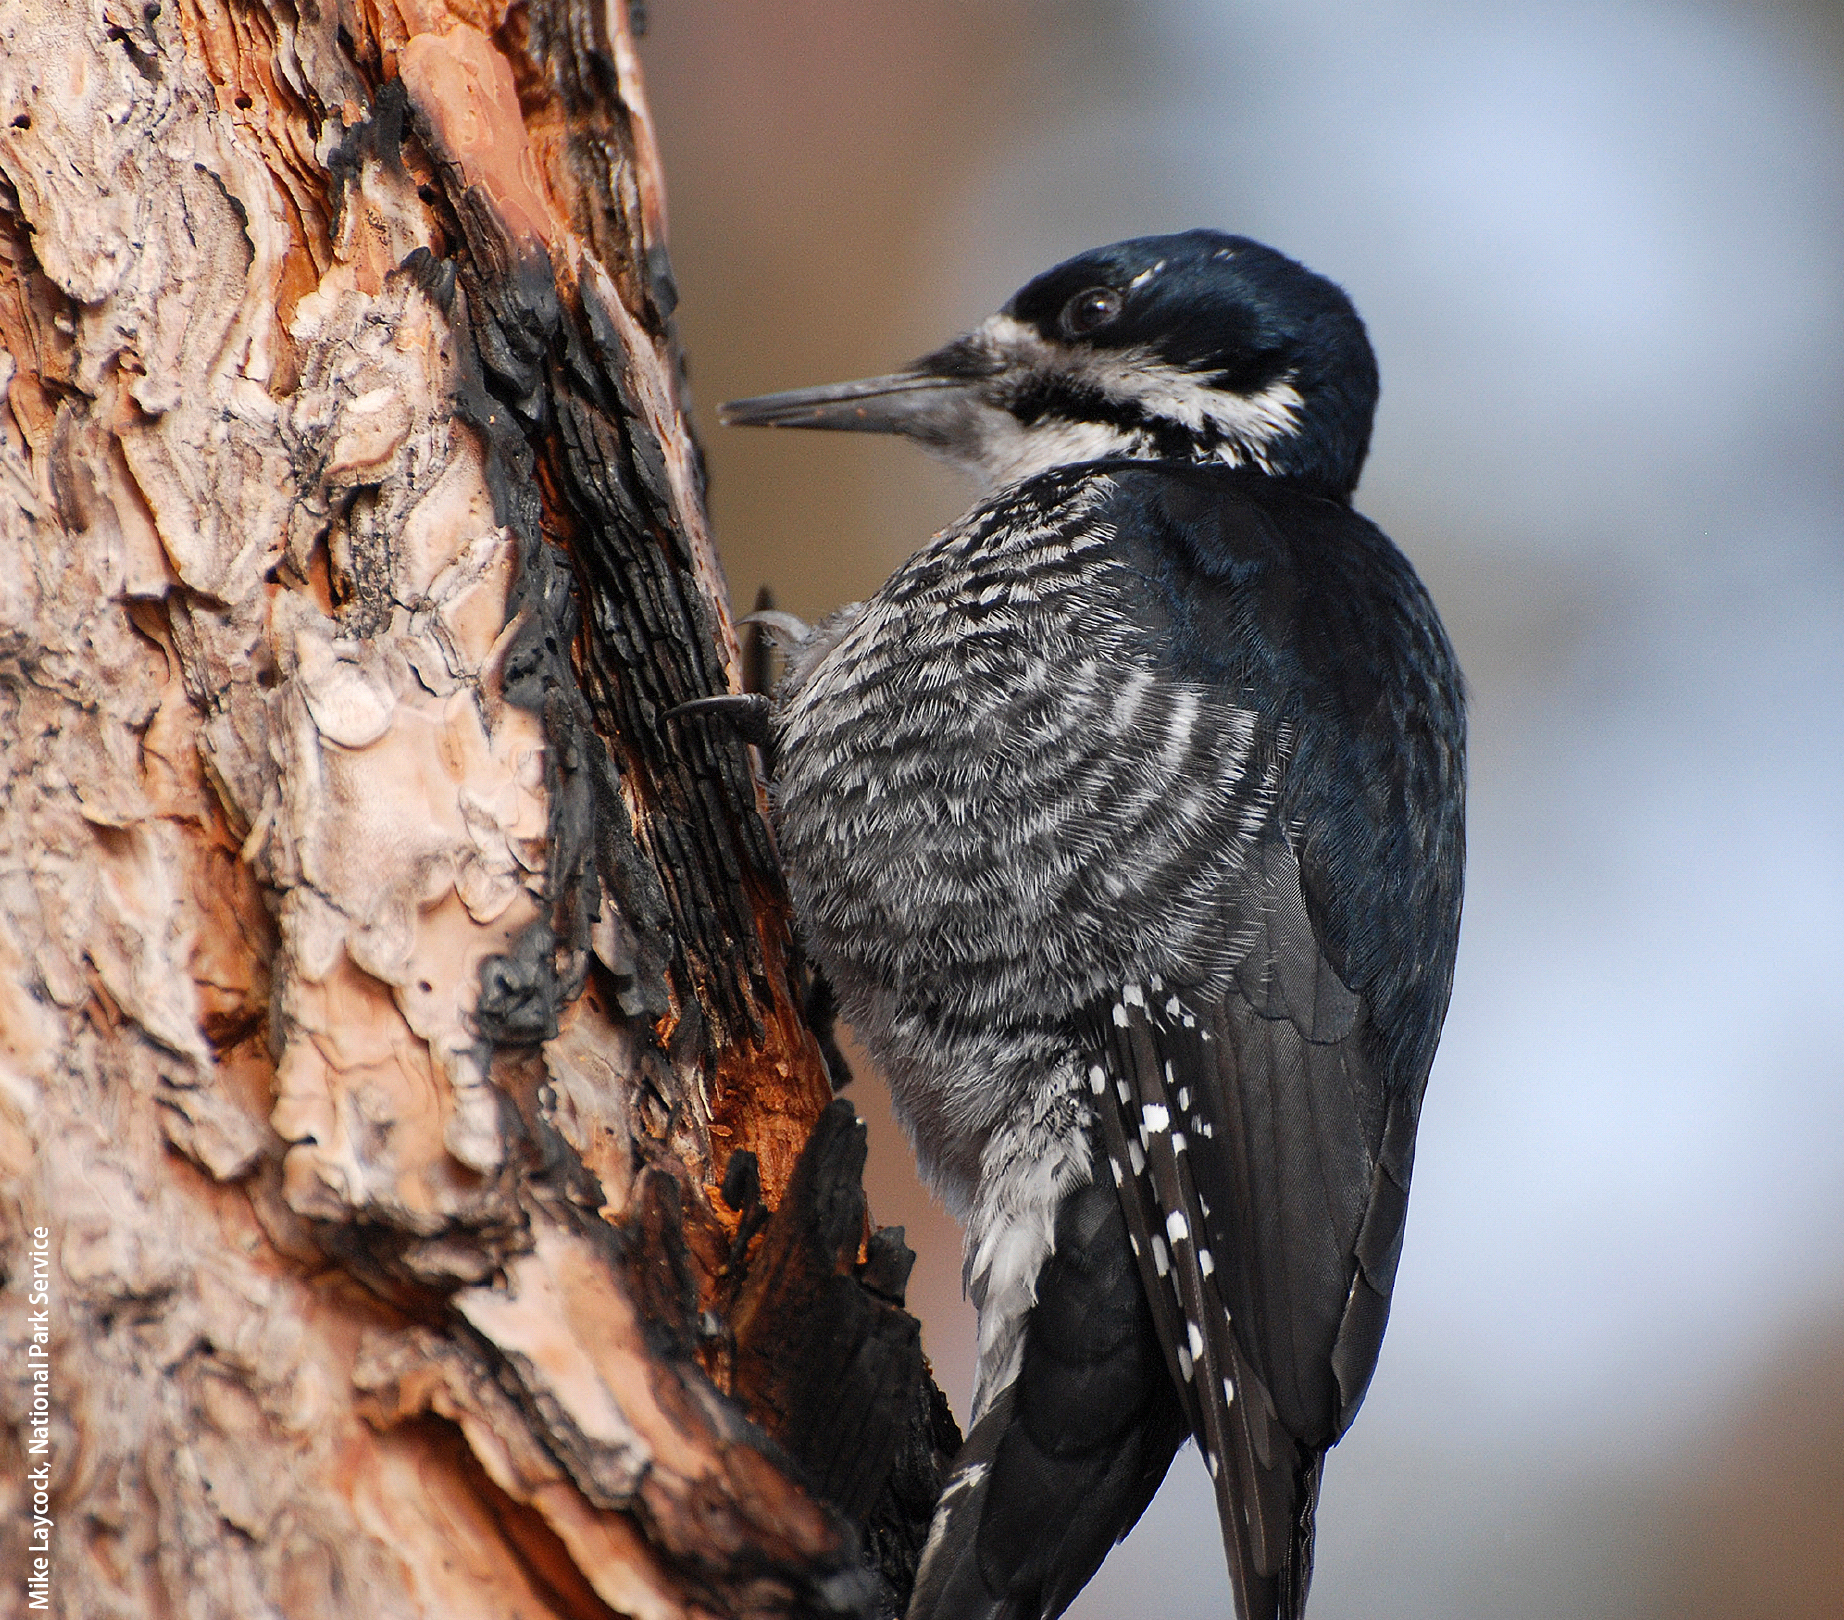 Several species in the Sierra Nevada, such as the black-backed woodpecker, may benefit from the conditions that occur after a high-severity fire.